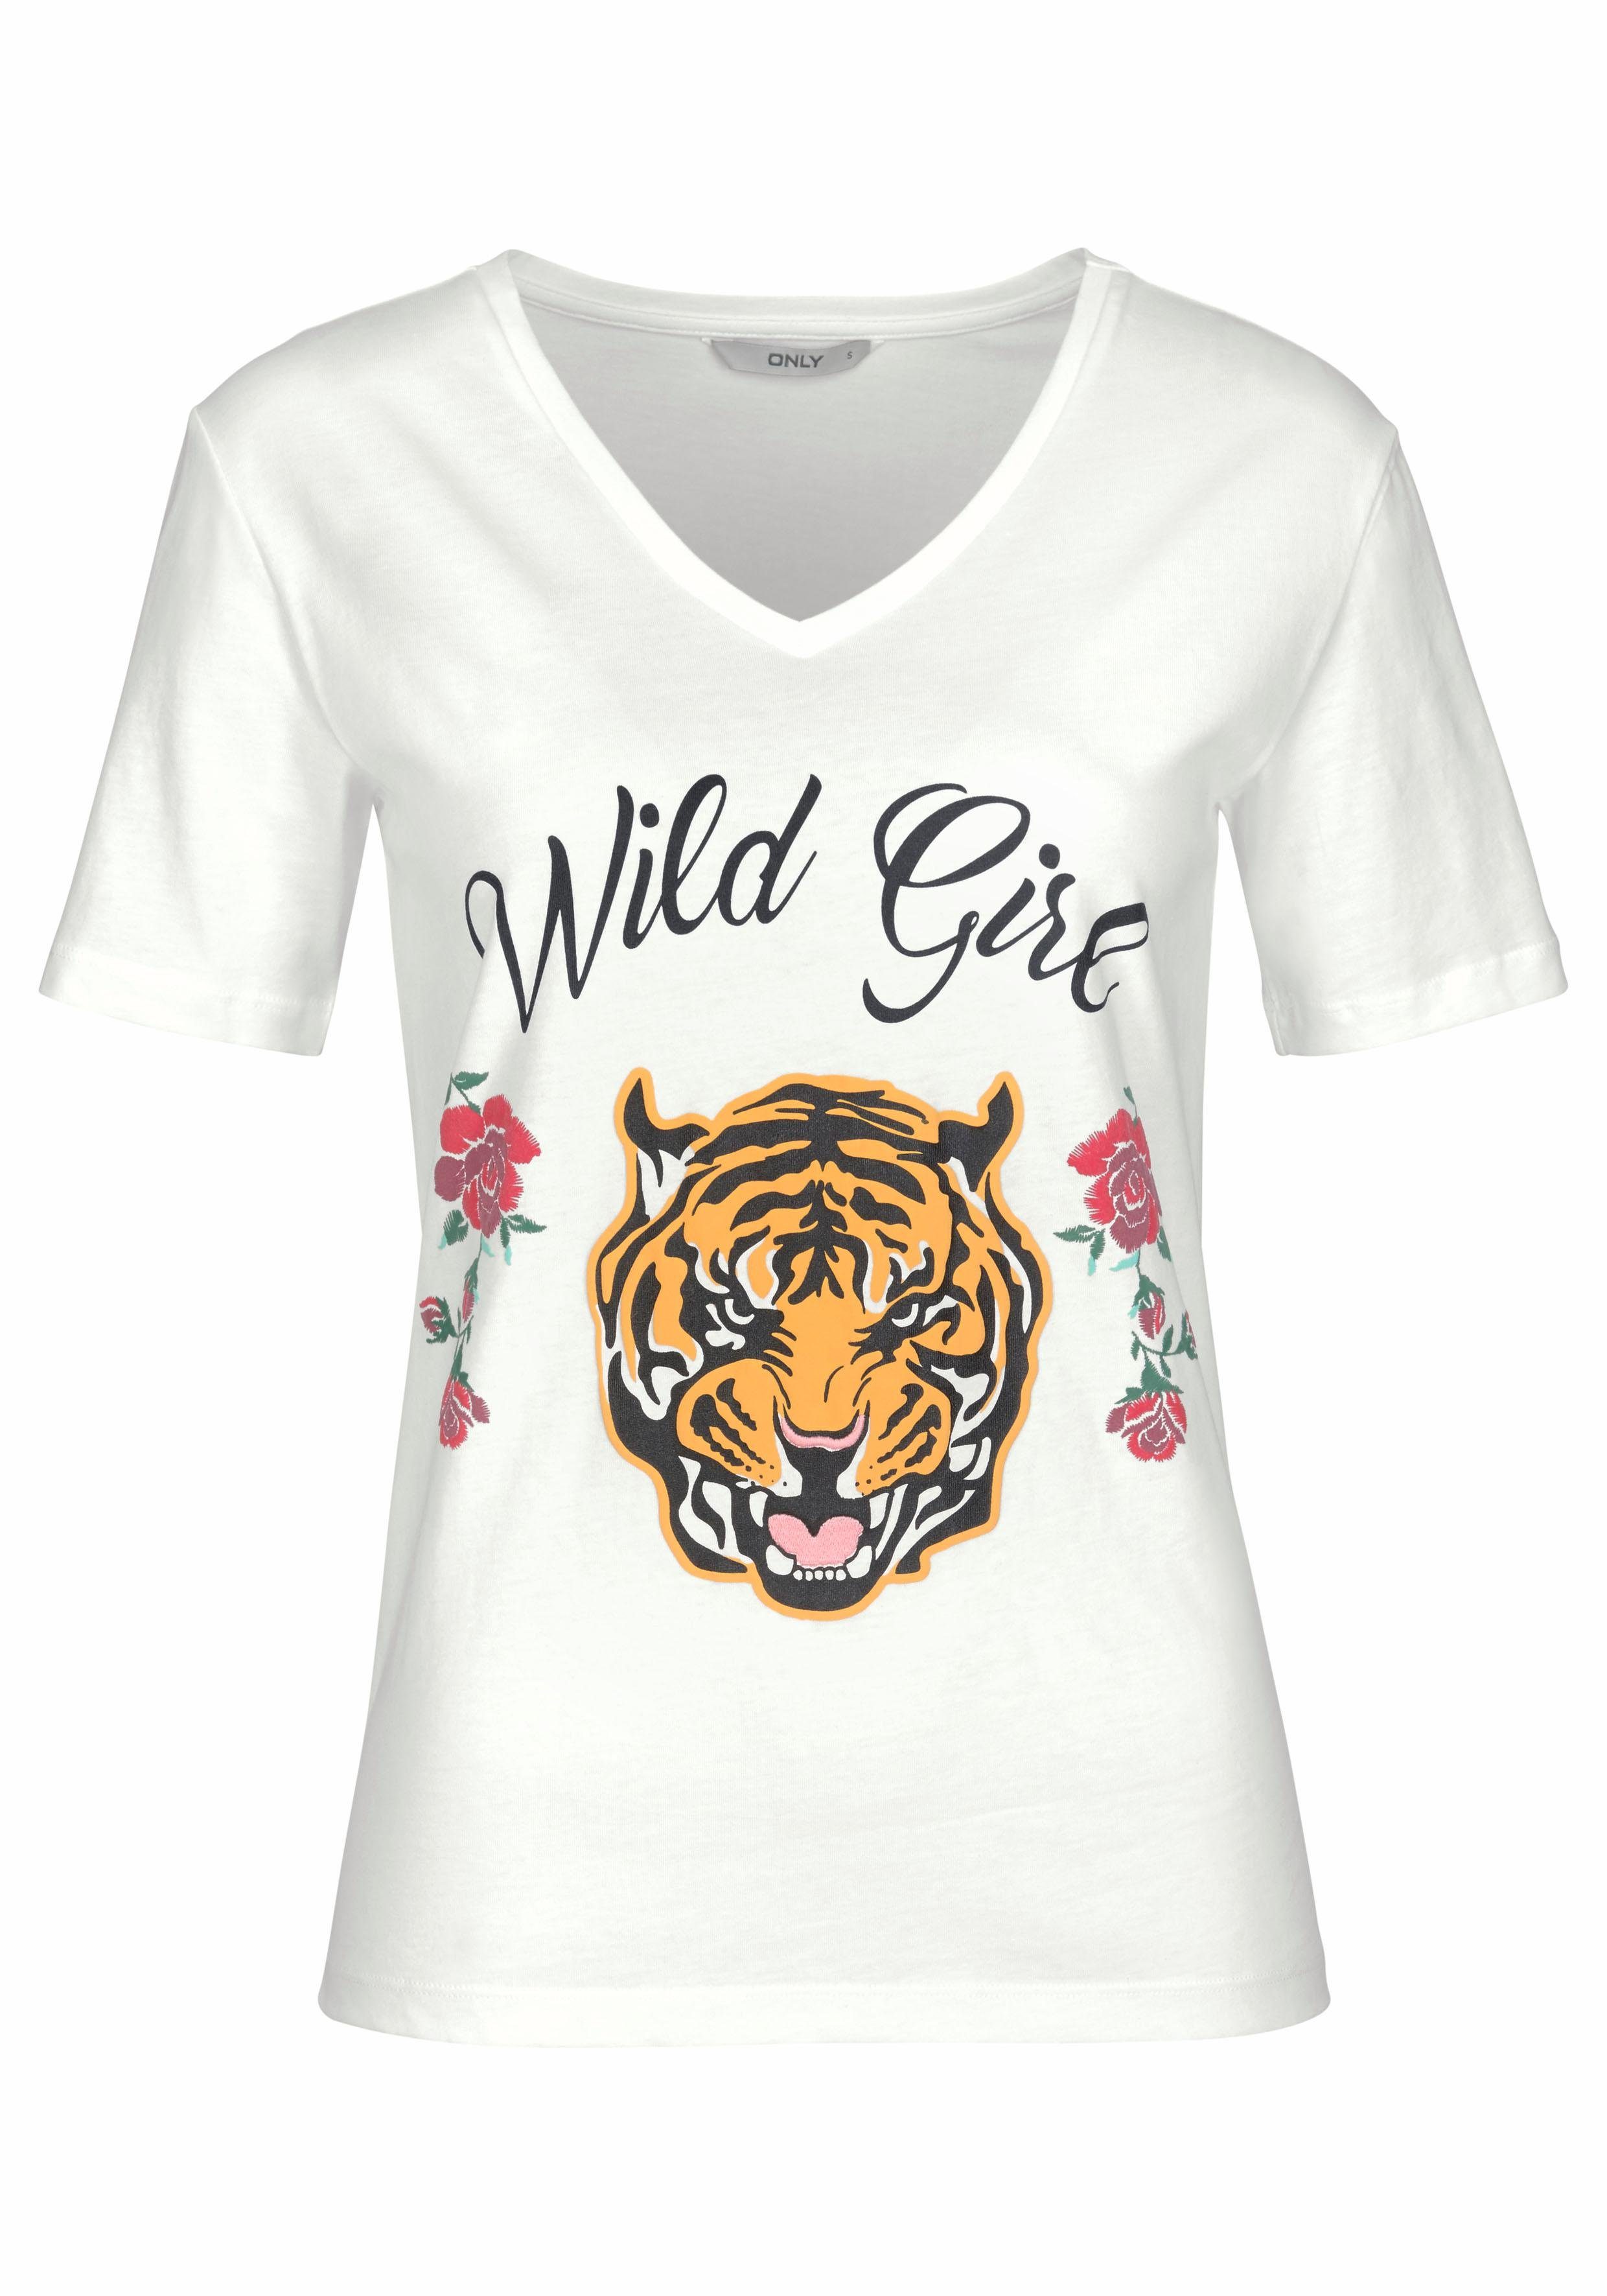 Otto - Only NU 15% KORTING: Only T-shirt WILD GIRL